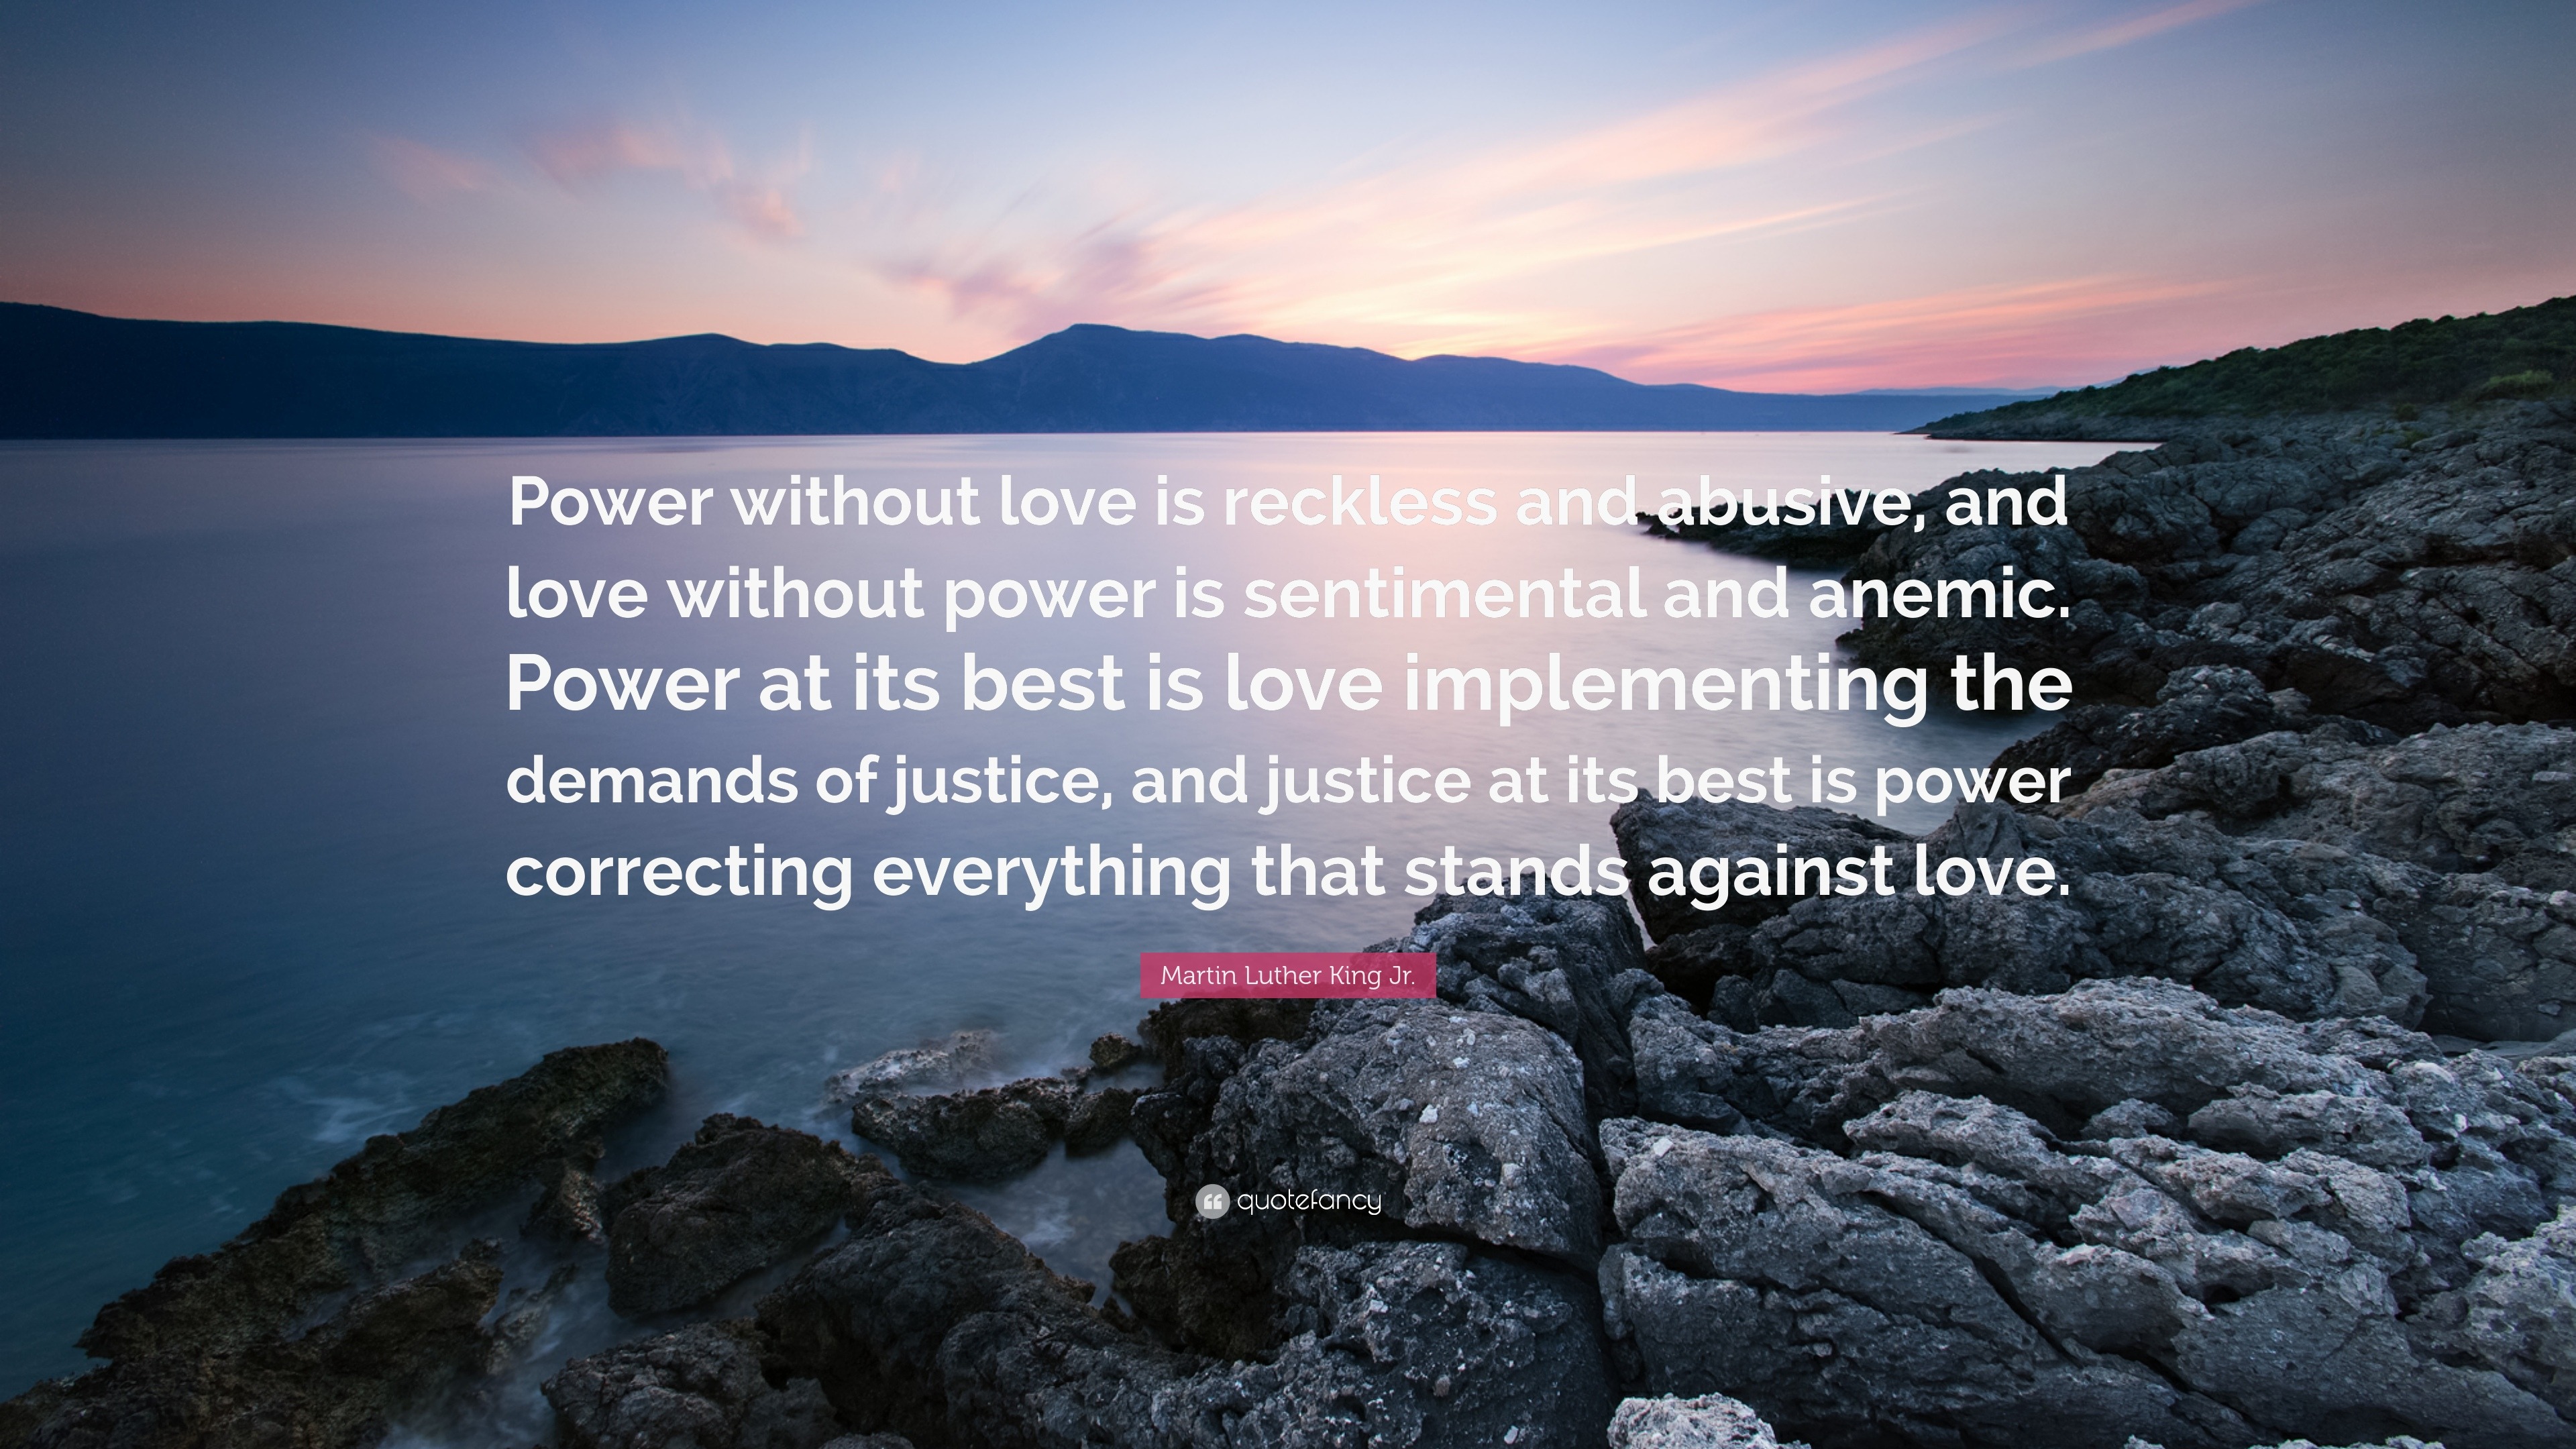 Martin Luther King Jr Quote “Power without love is reckless and abusive